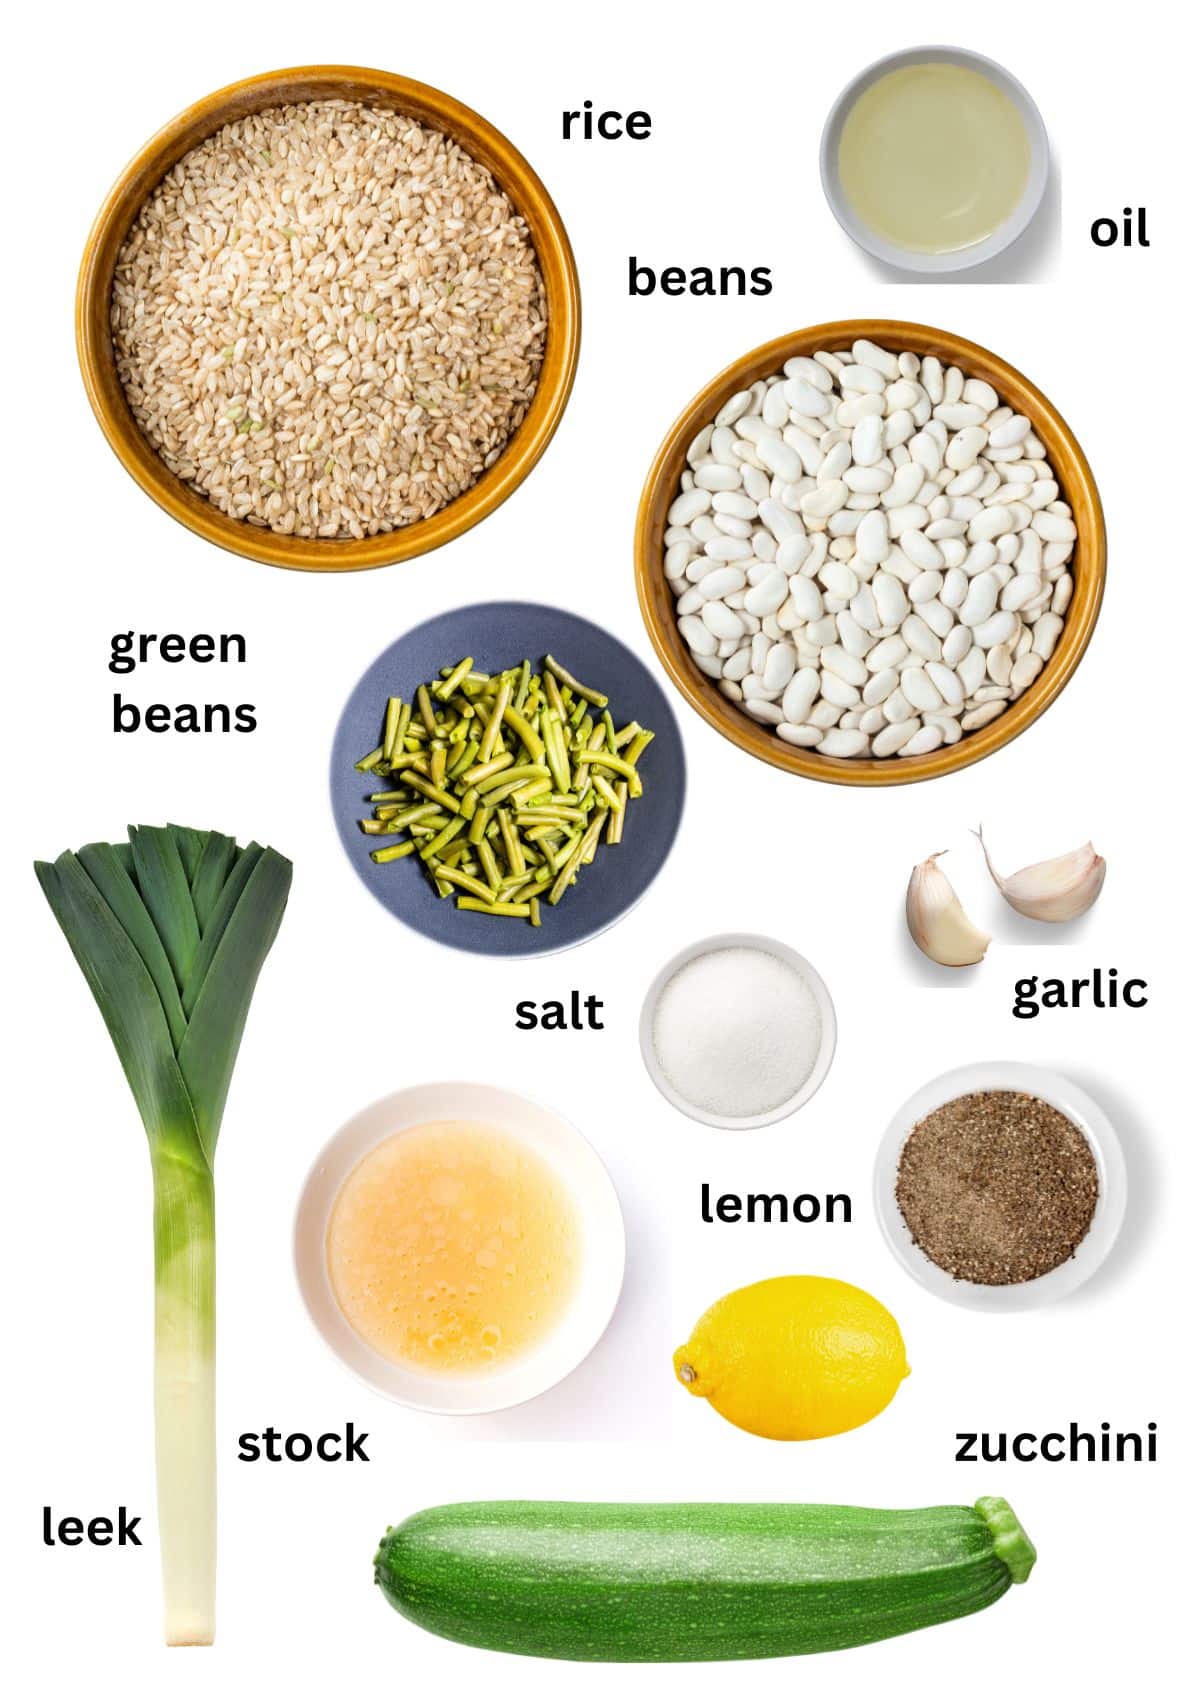 listed ingredients in bowls for making soup with rice, beans, leeks, zucchini and green beans.